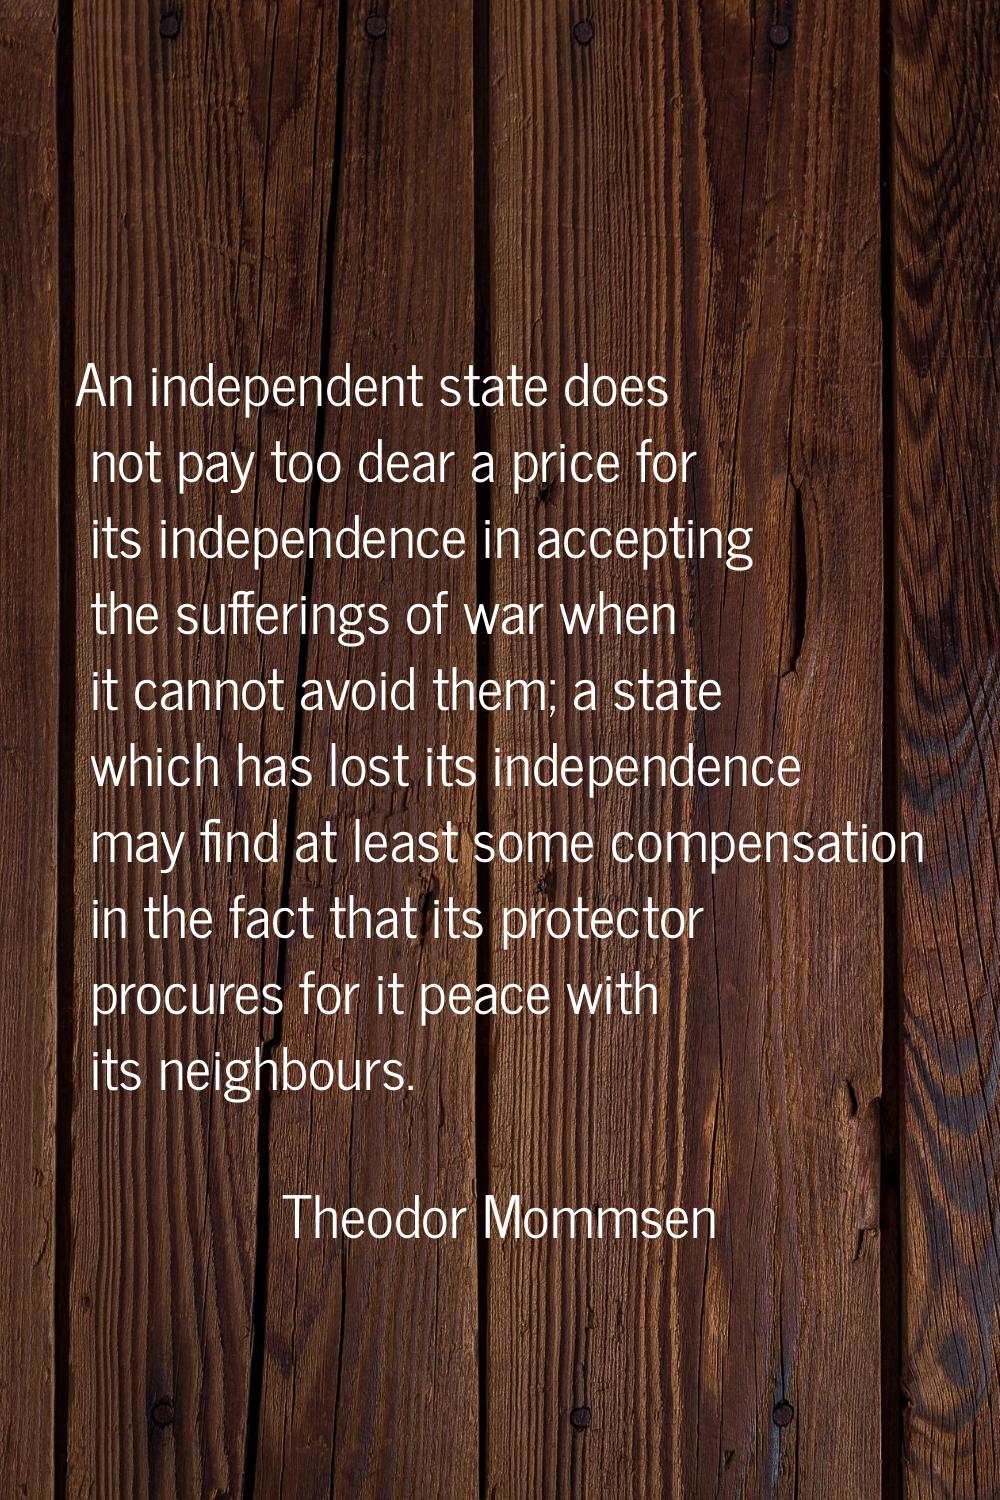 An independent state does not pay too dear a price for its independence in accepting the sufferings